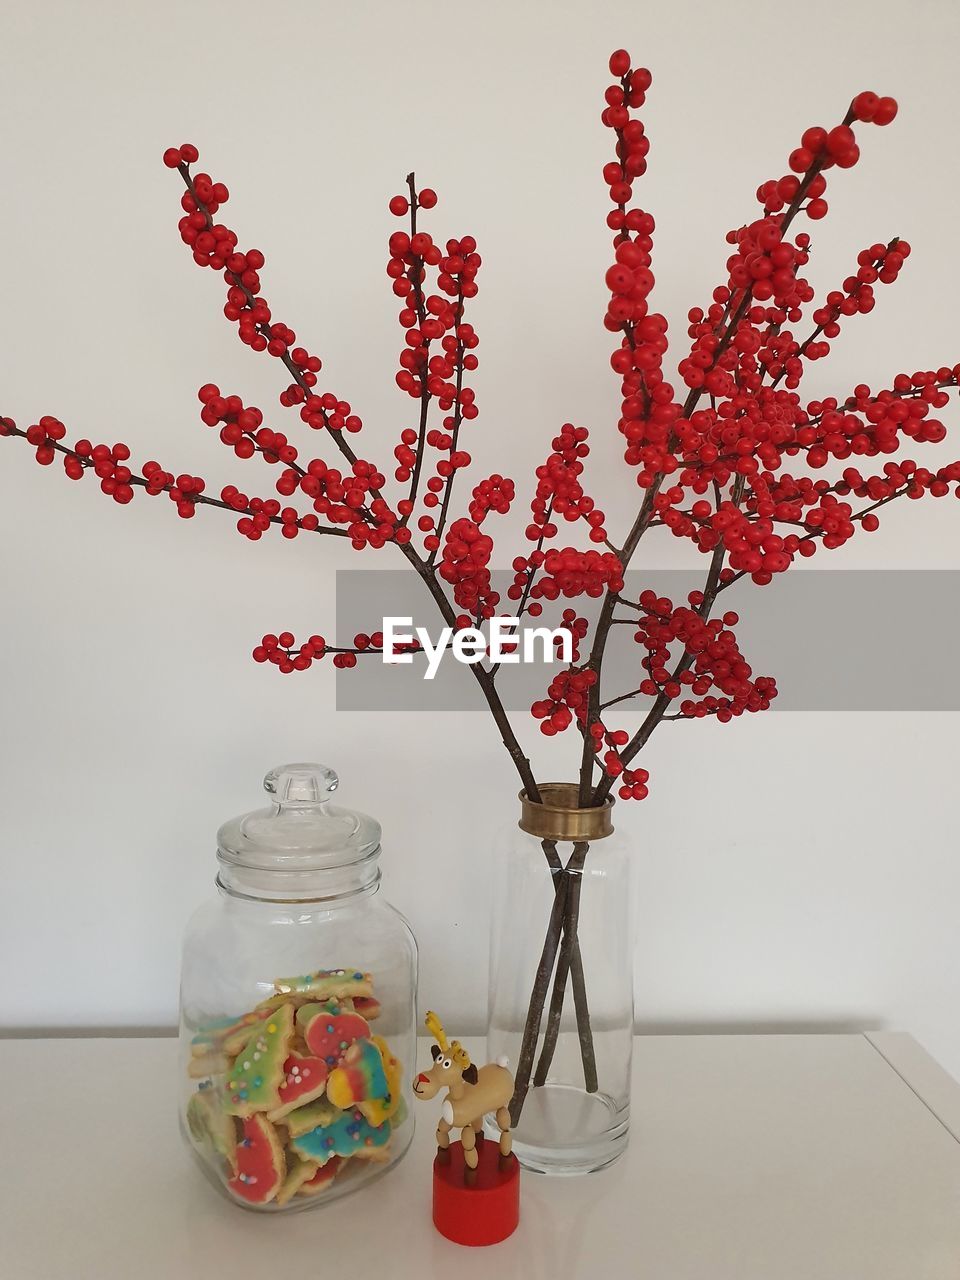 CLOSE-UP OF RED FLOWER VASE ON TABLE